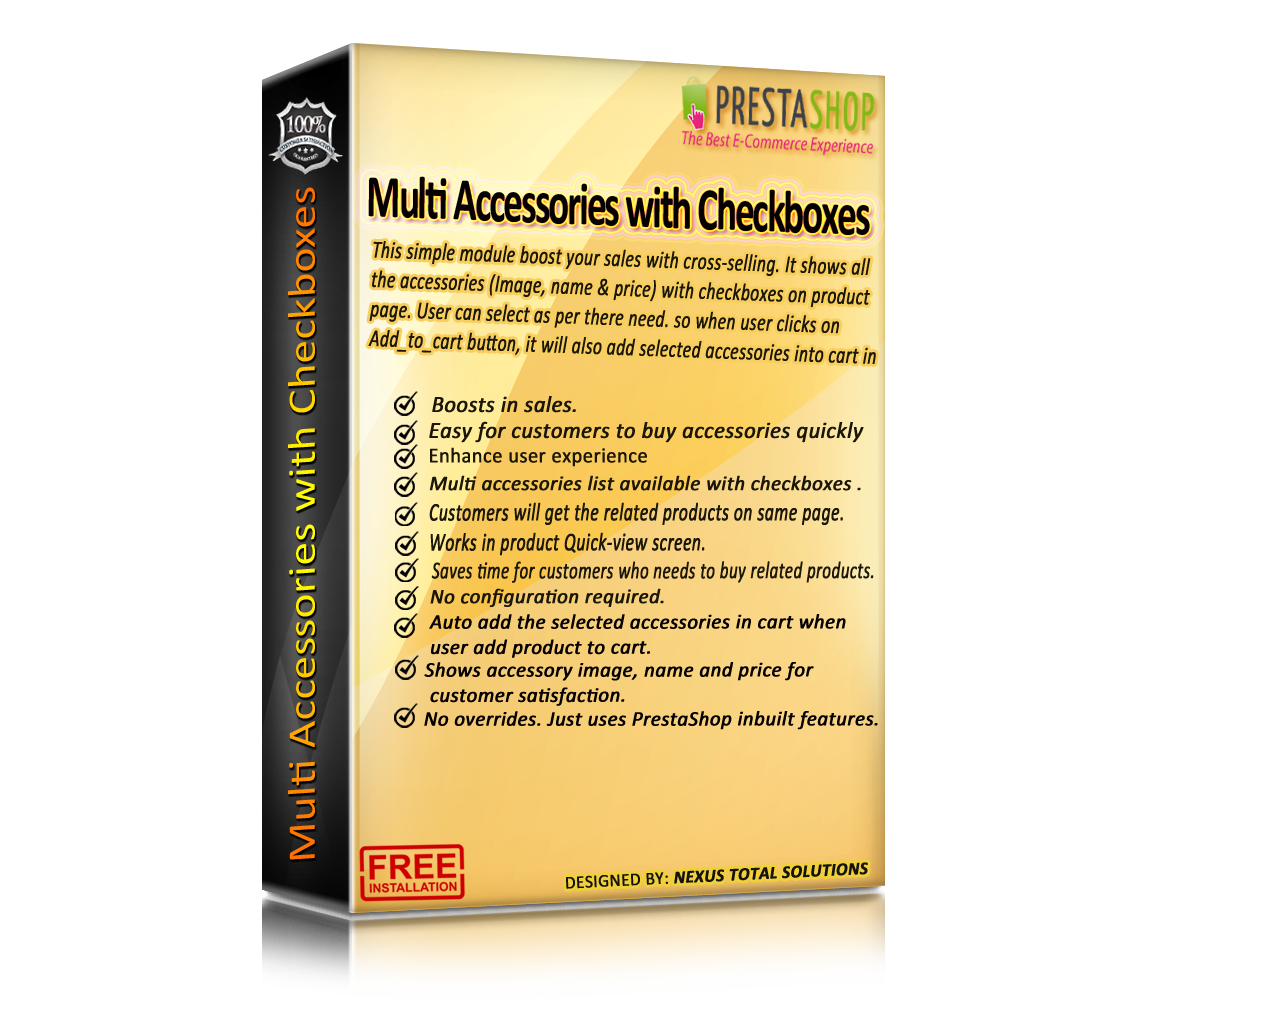 Multi Accessories with Checkboxes	Module